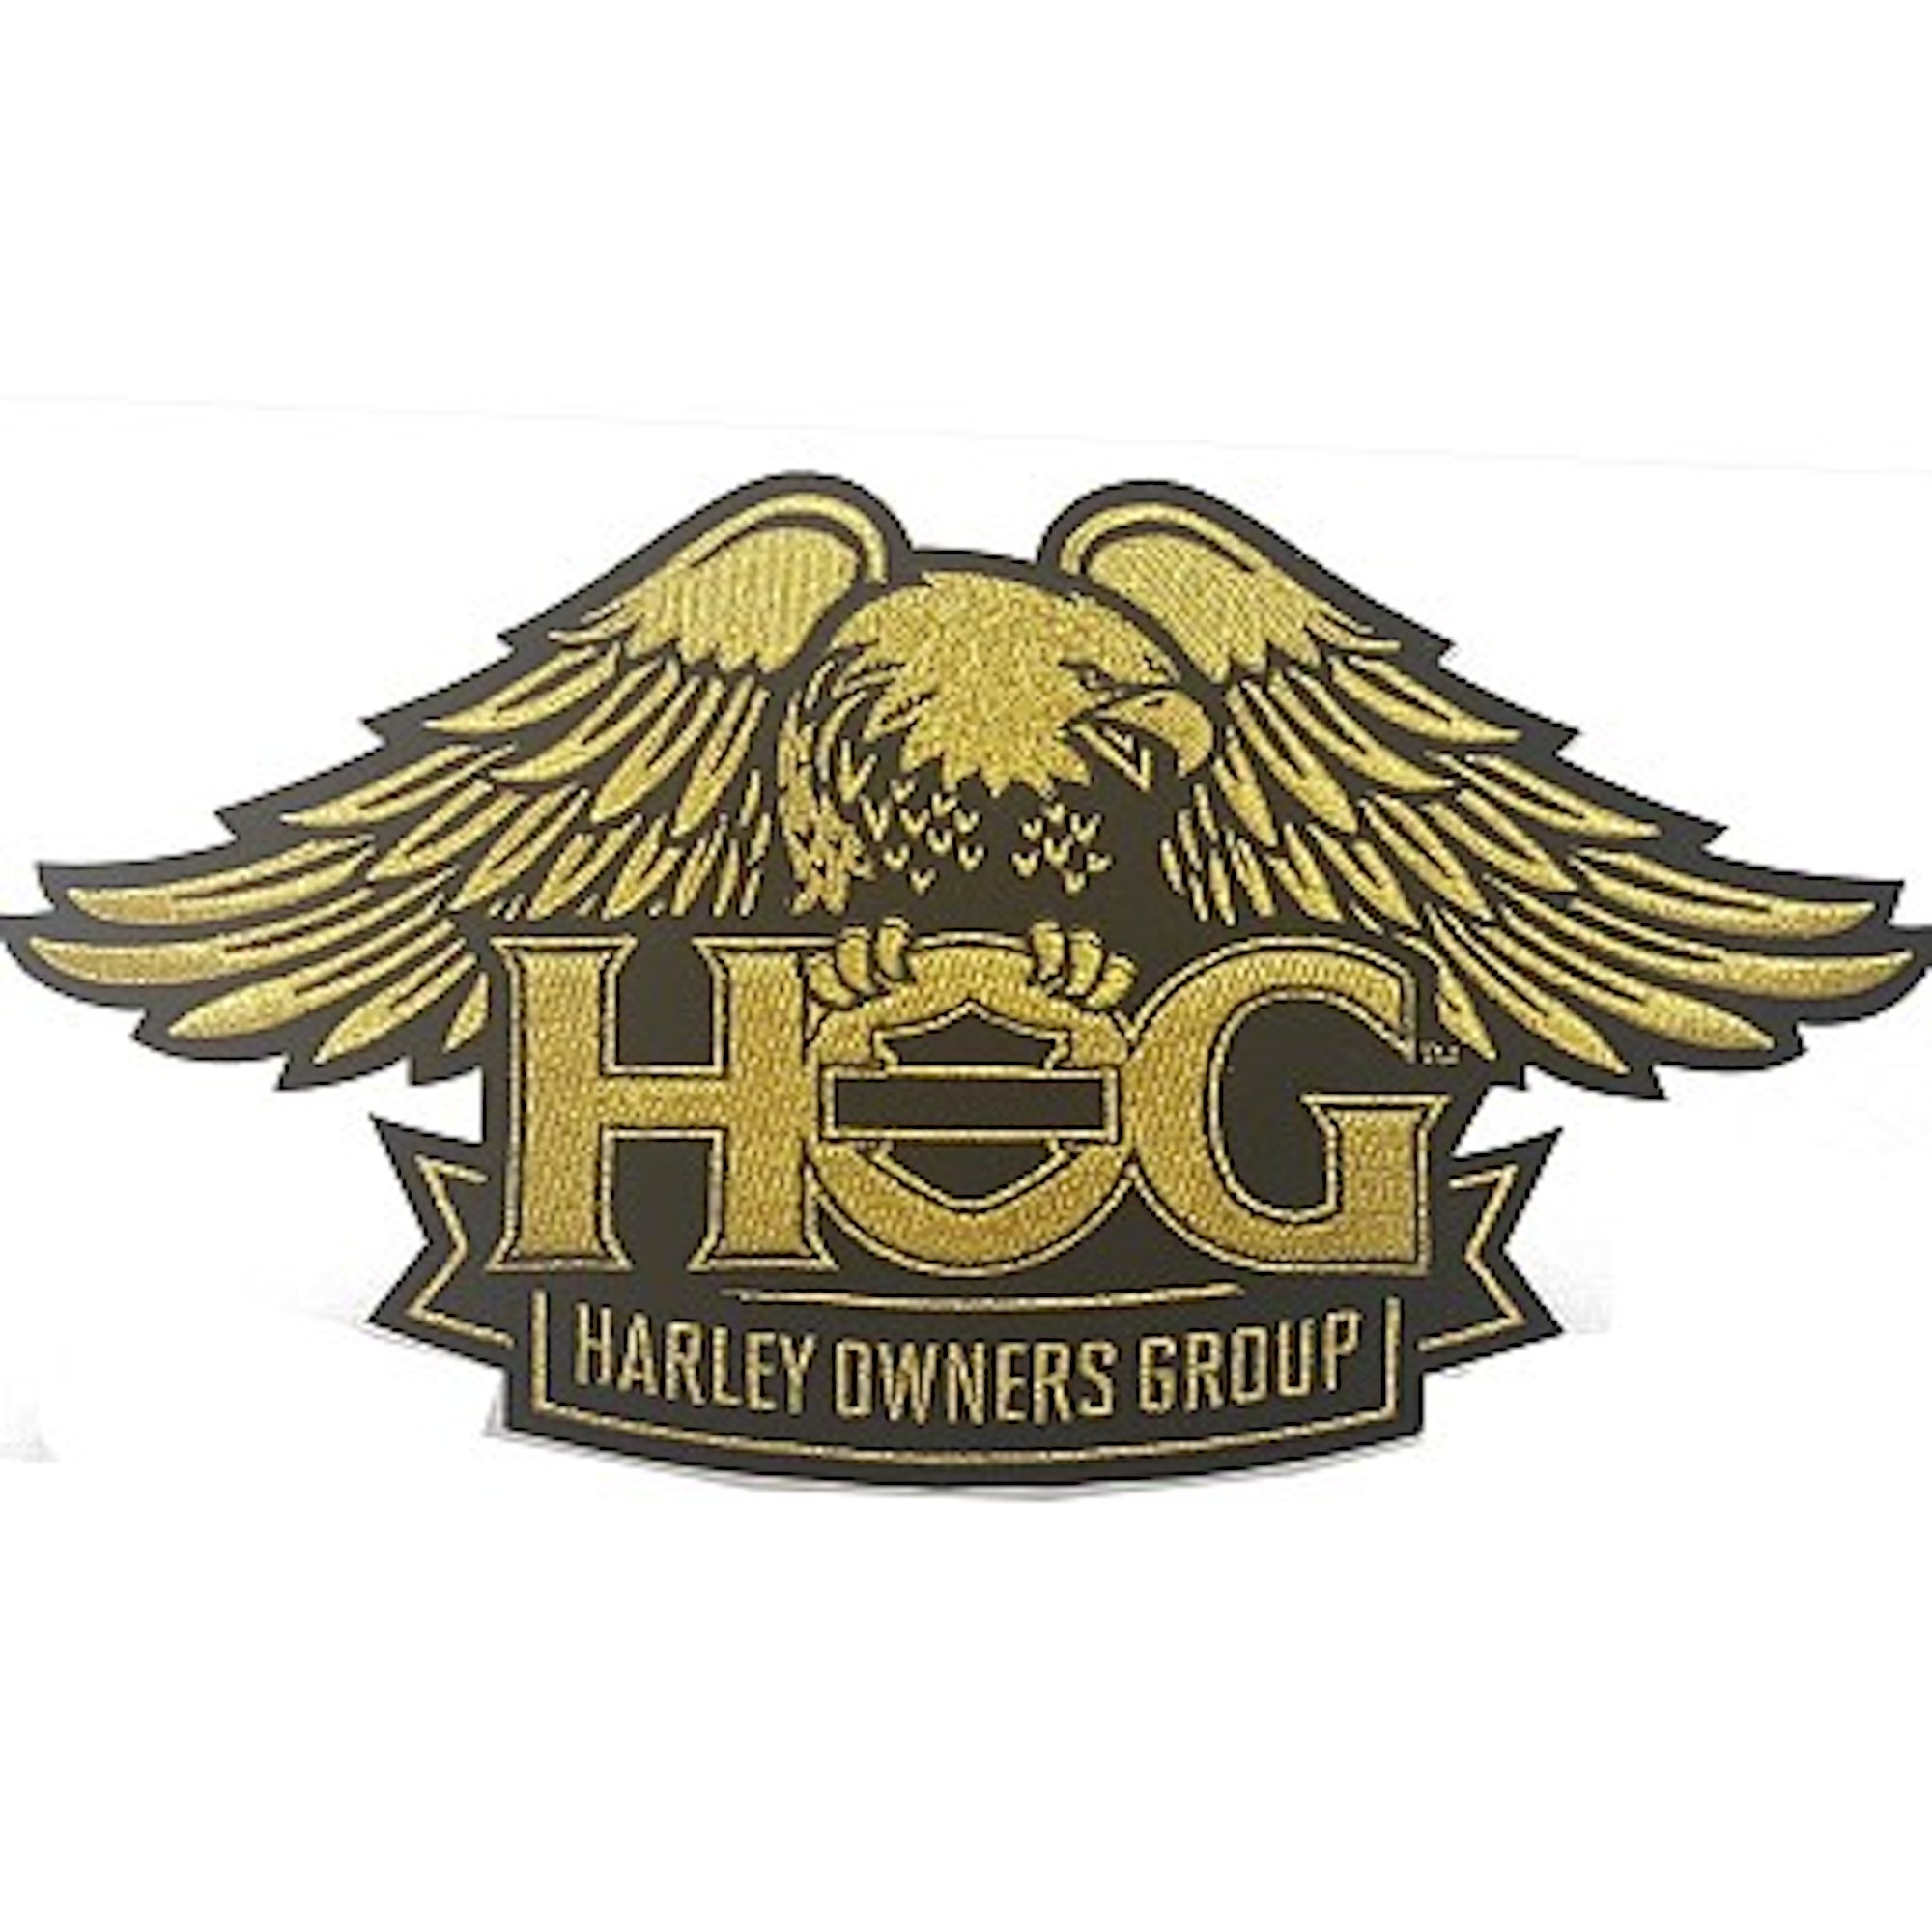 H.O.G. Eagle Patch in Gold - LARGE